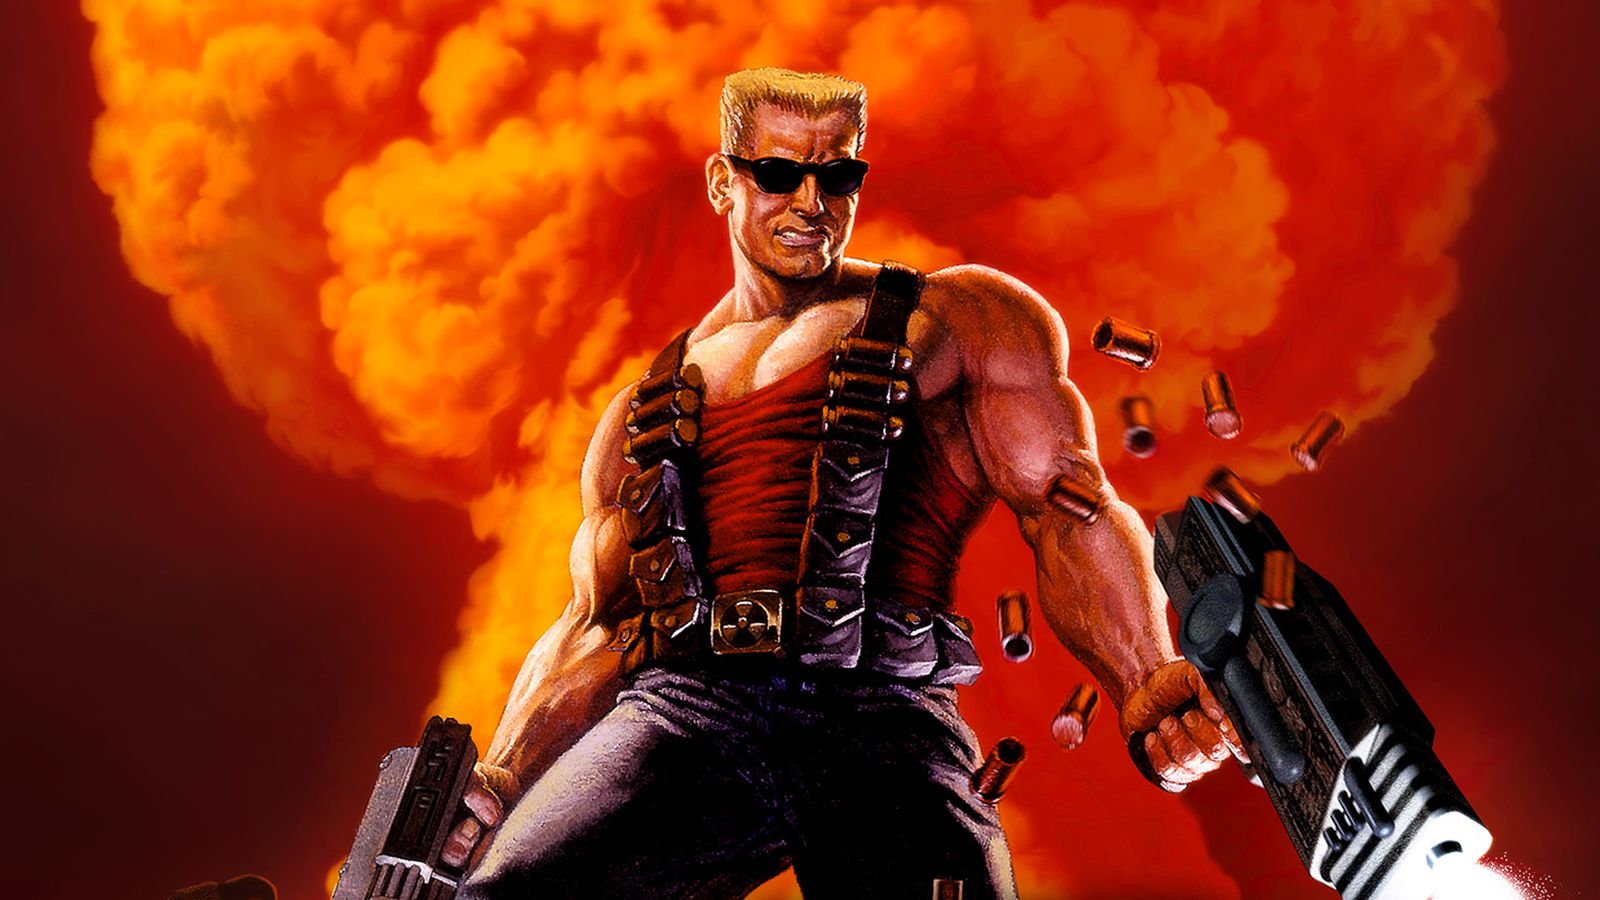 Problematic Characters Players Love- Duke Nukem